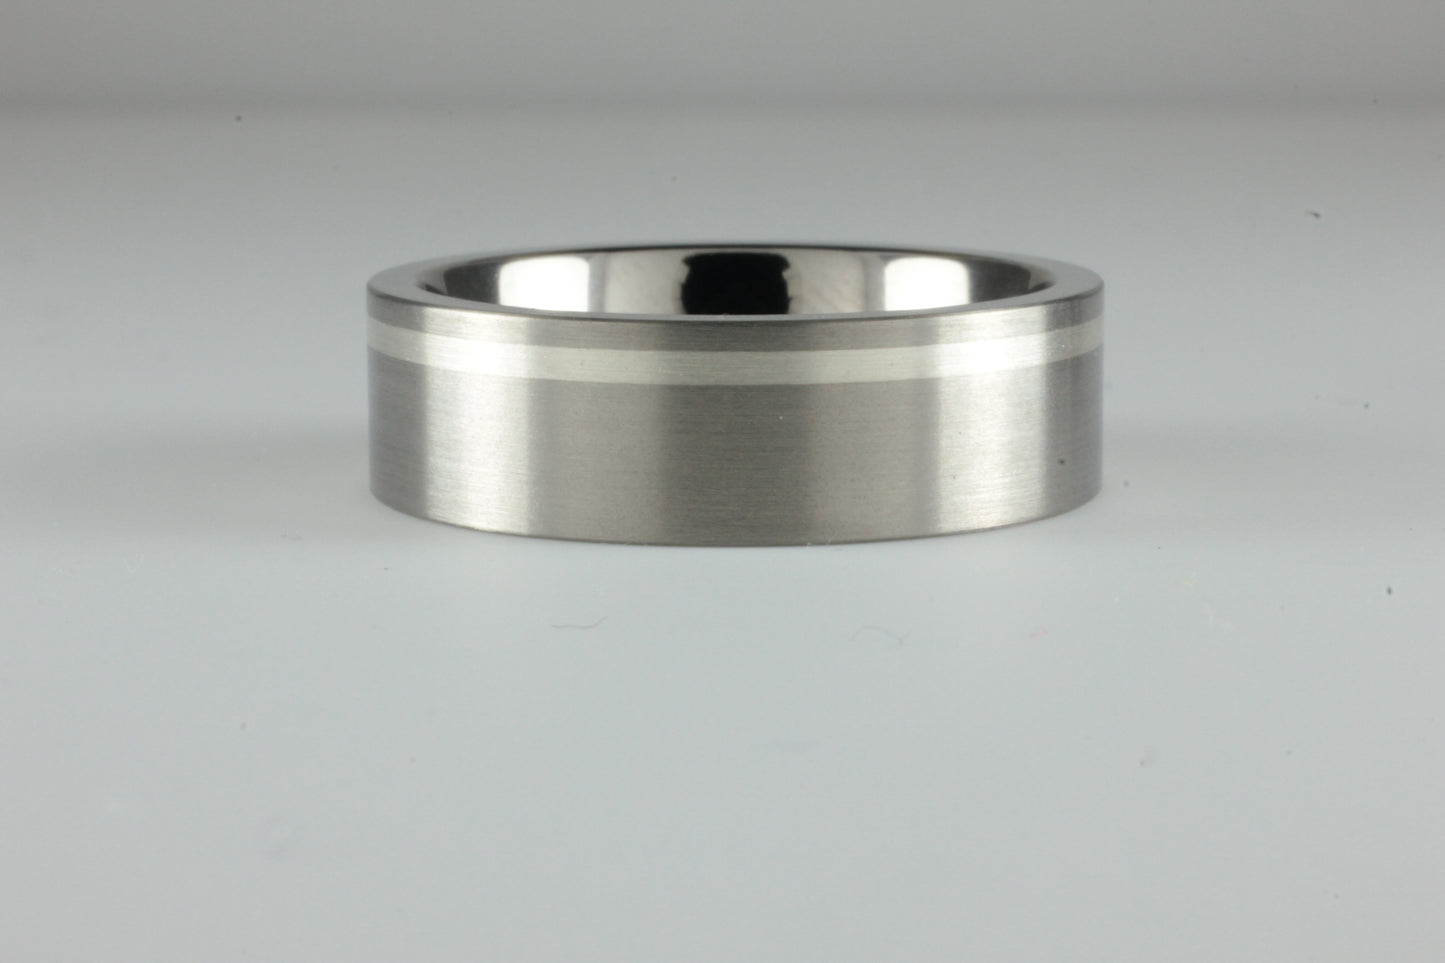 6mm Titanium Band with Offset Silver Inlay Satin Finish